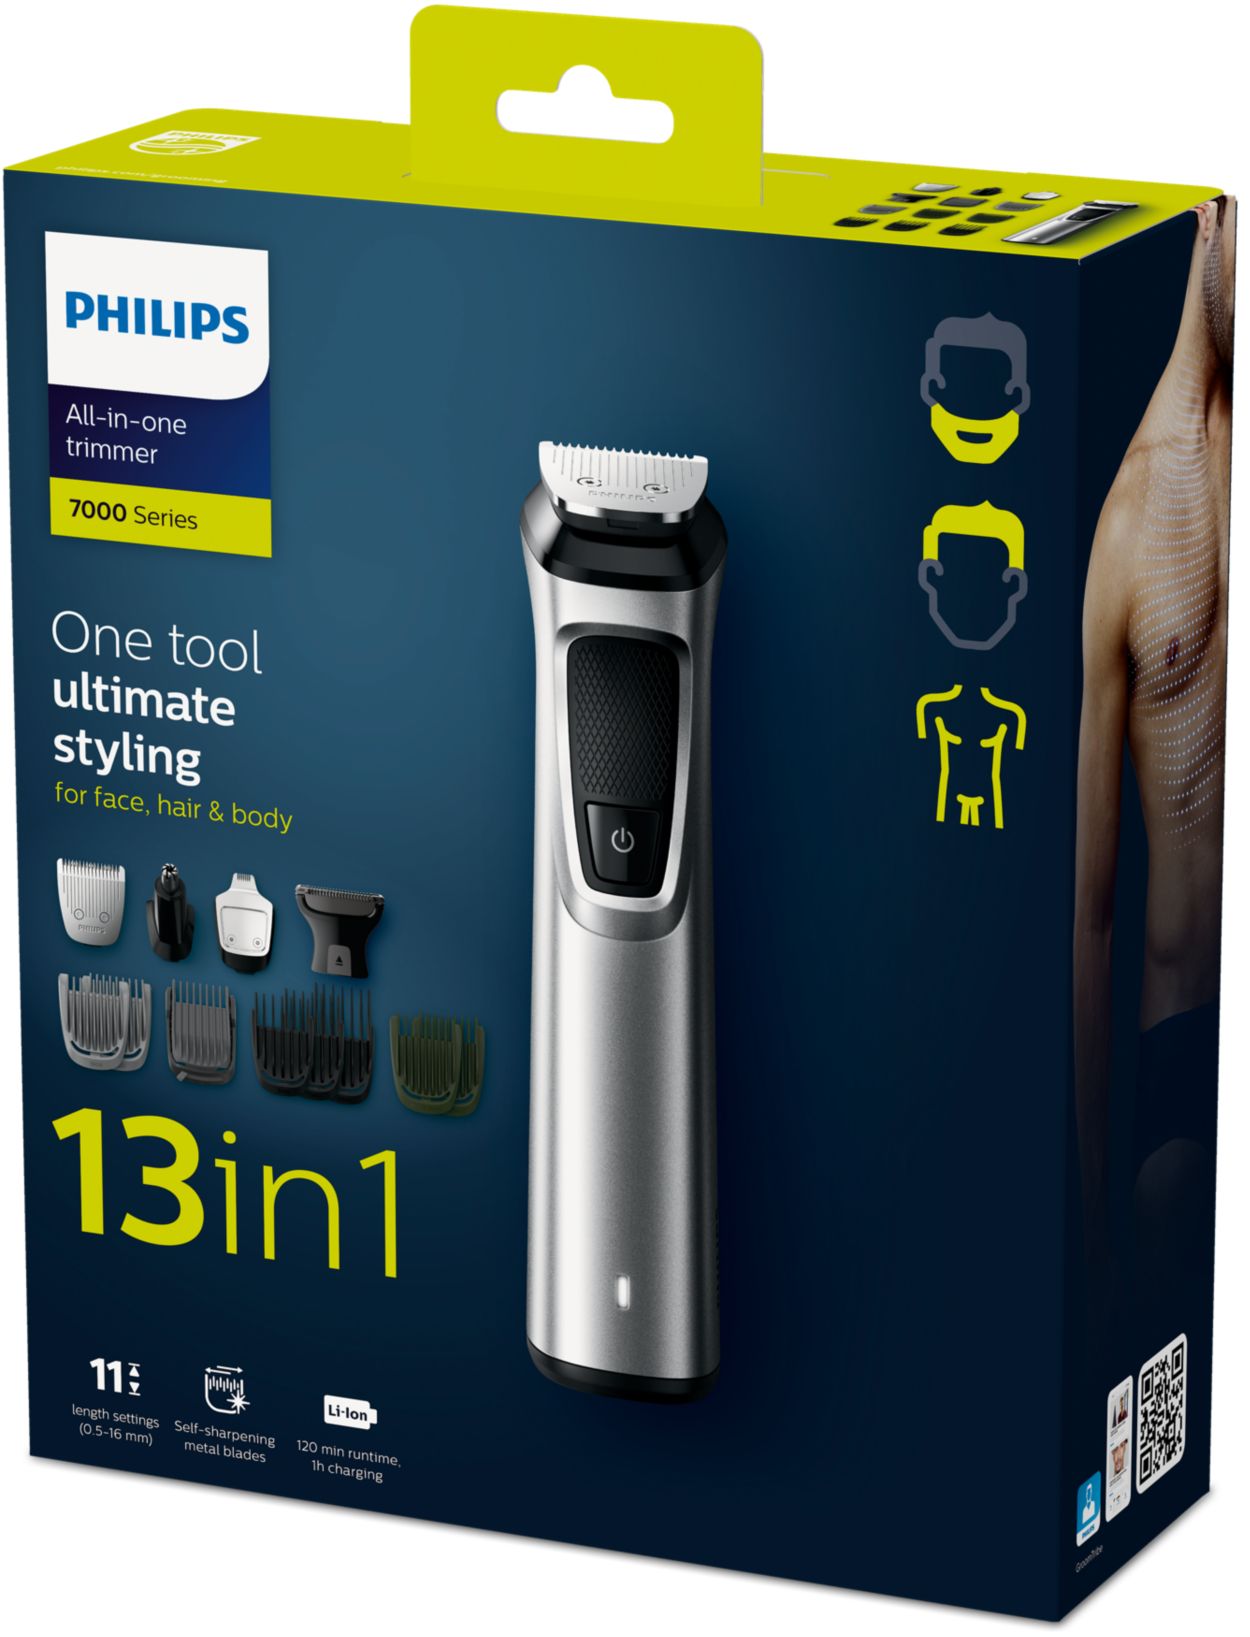 https://images.philips.com/is/image/philipsconsumer/646d3934b687433bbcd2ae7700e785f3?$jpglarge$&wid=1250